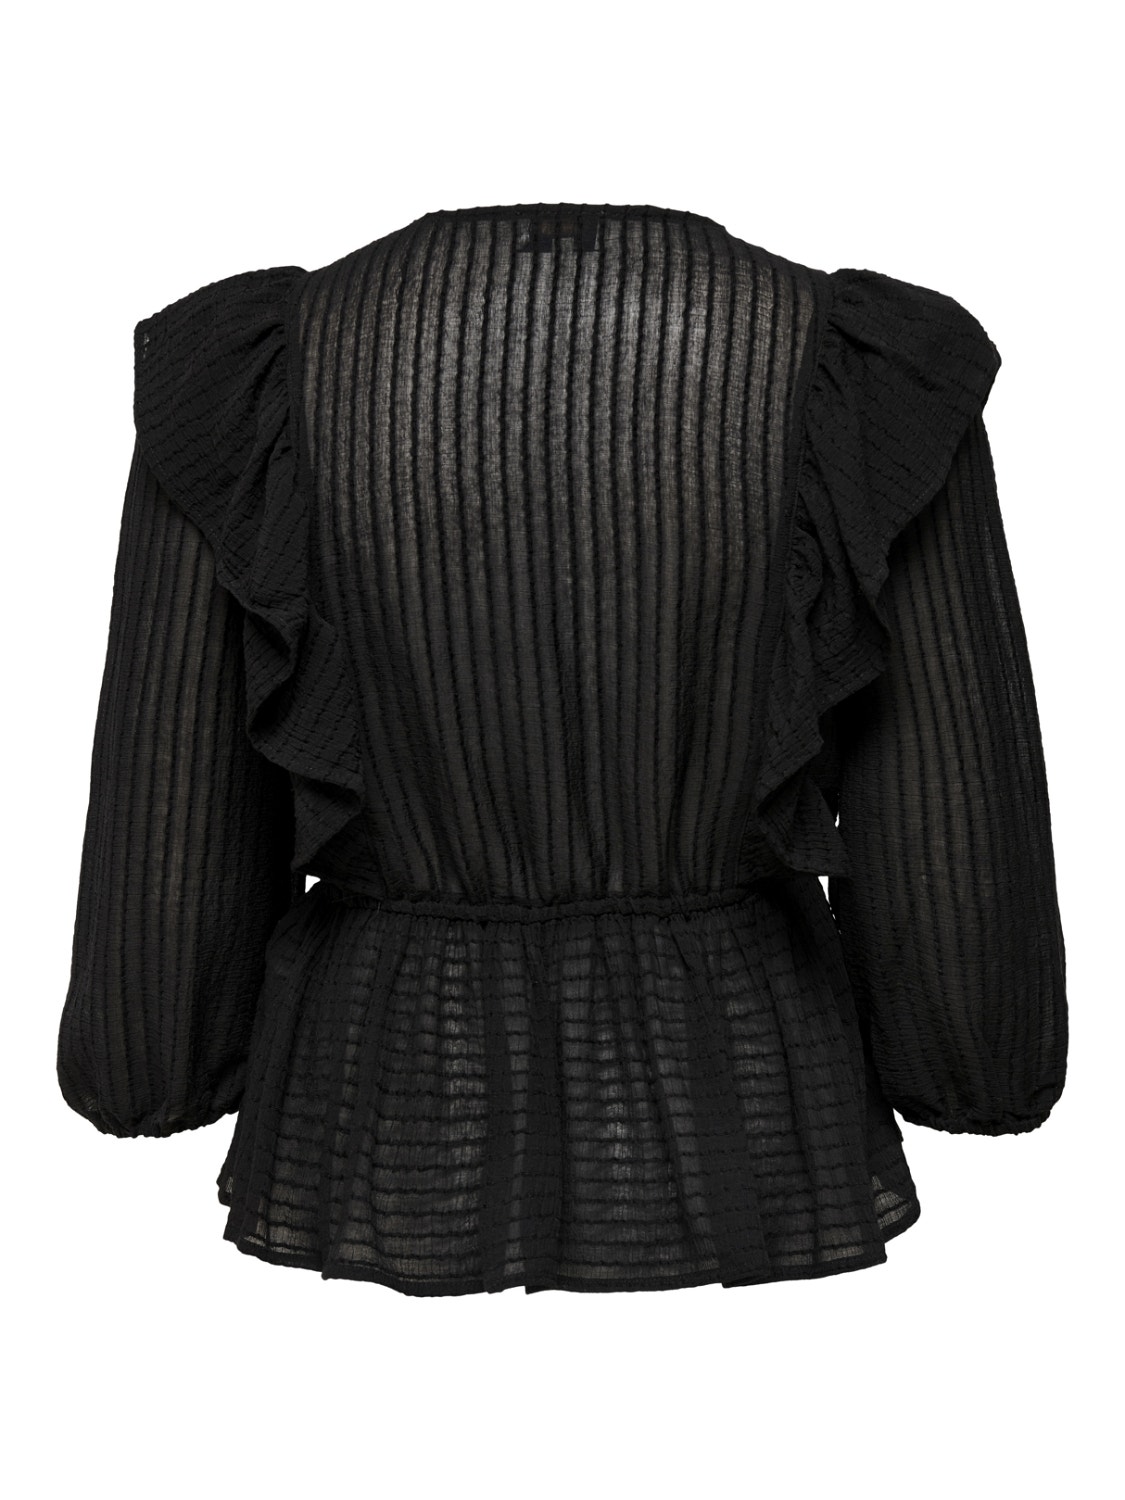 ONLY Wrap frill Top -Black - 15239286